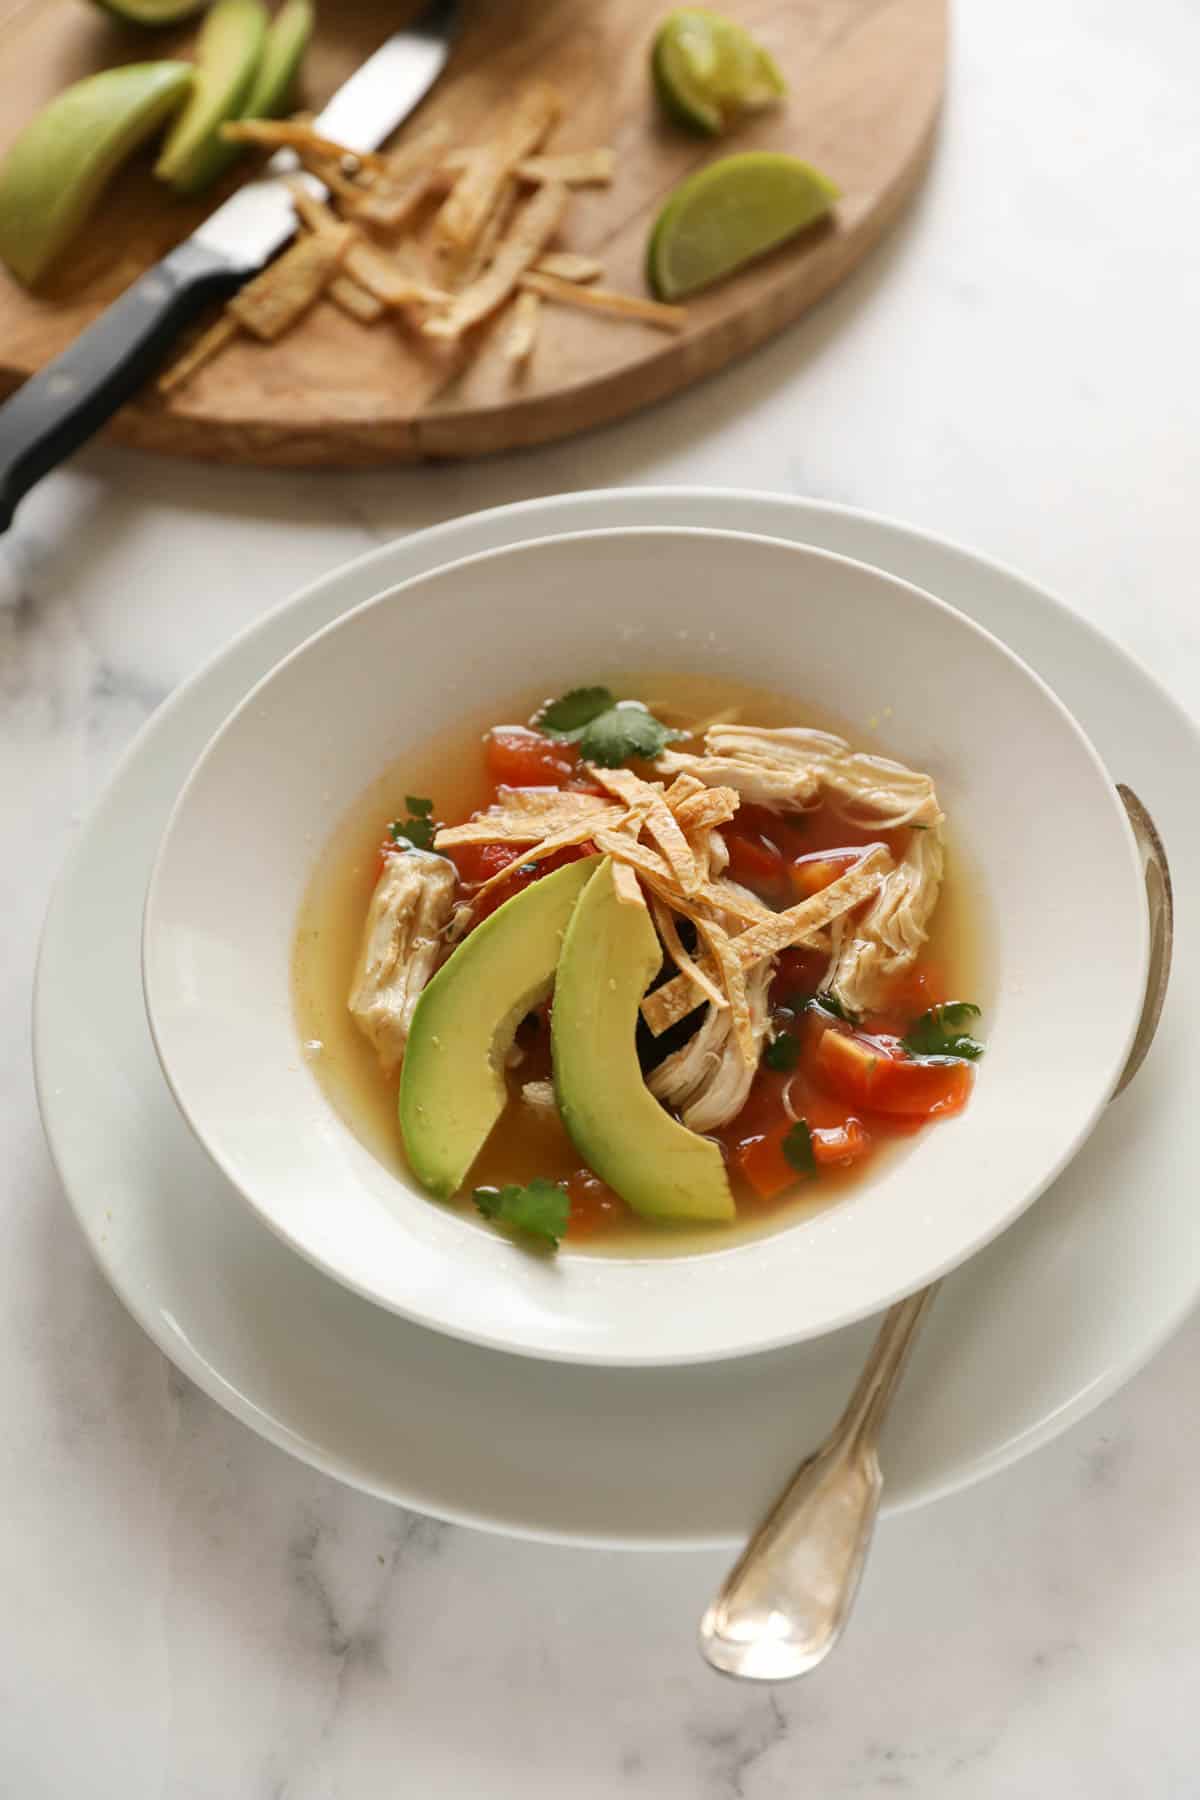 A bowl of soup with chicken, tortillas and avocado